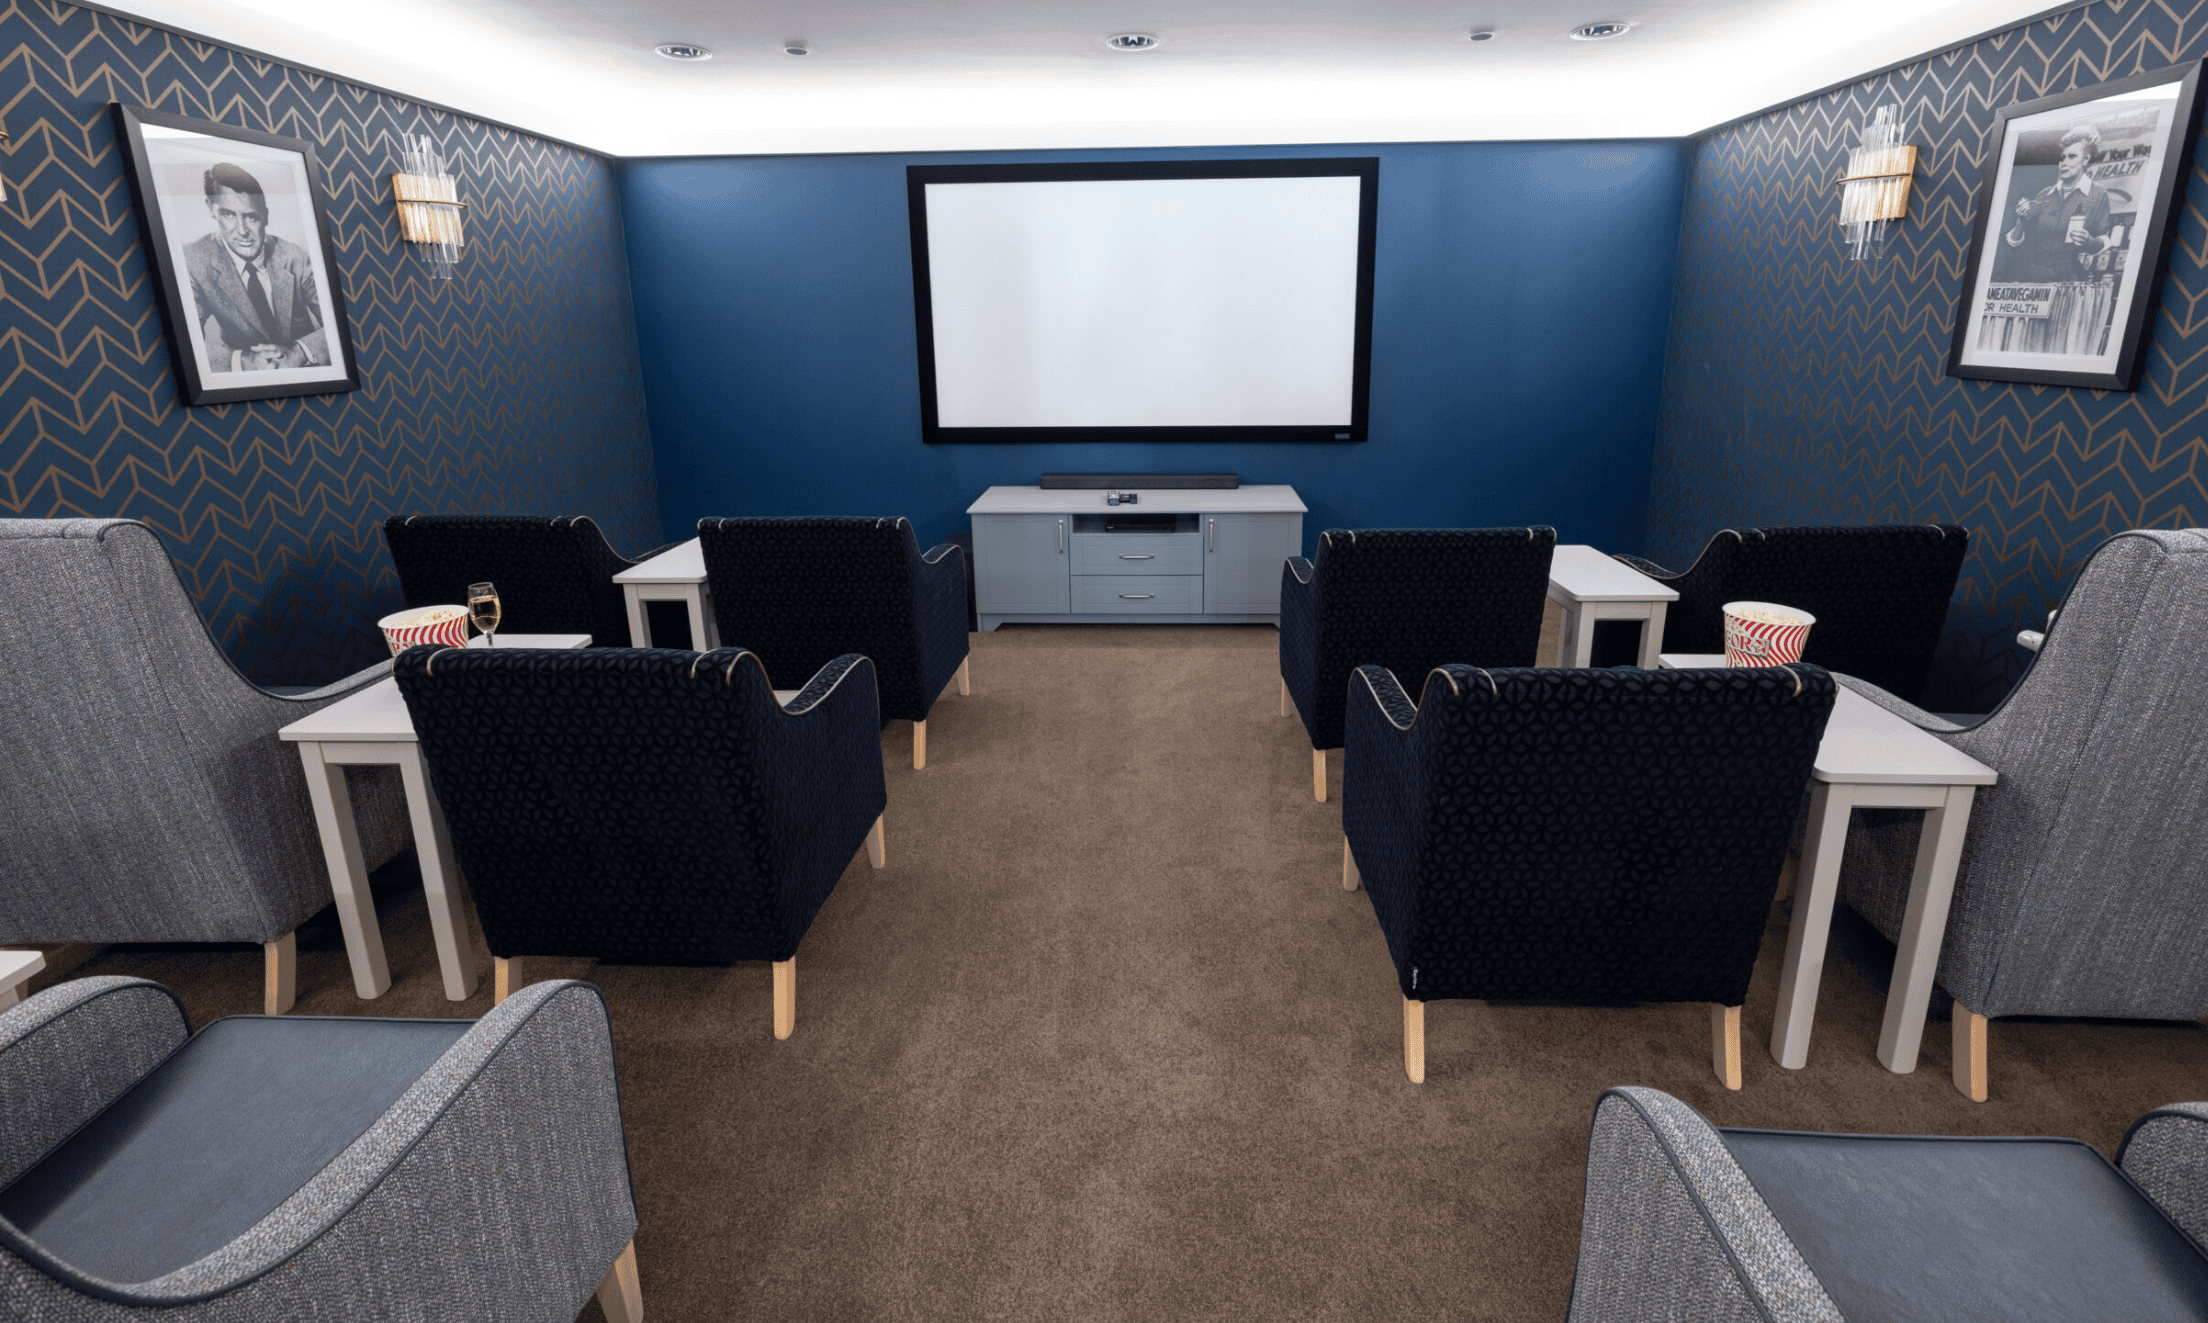 Cinema of Mearns View care home in Glasgow, Scotland